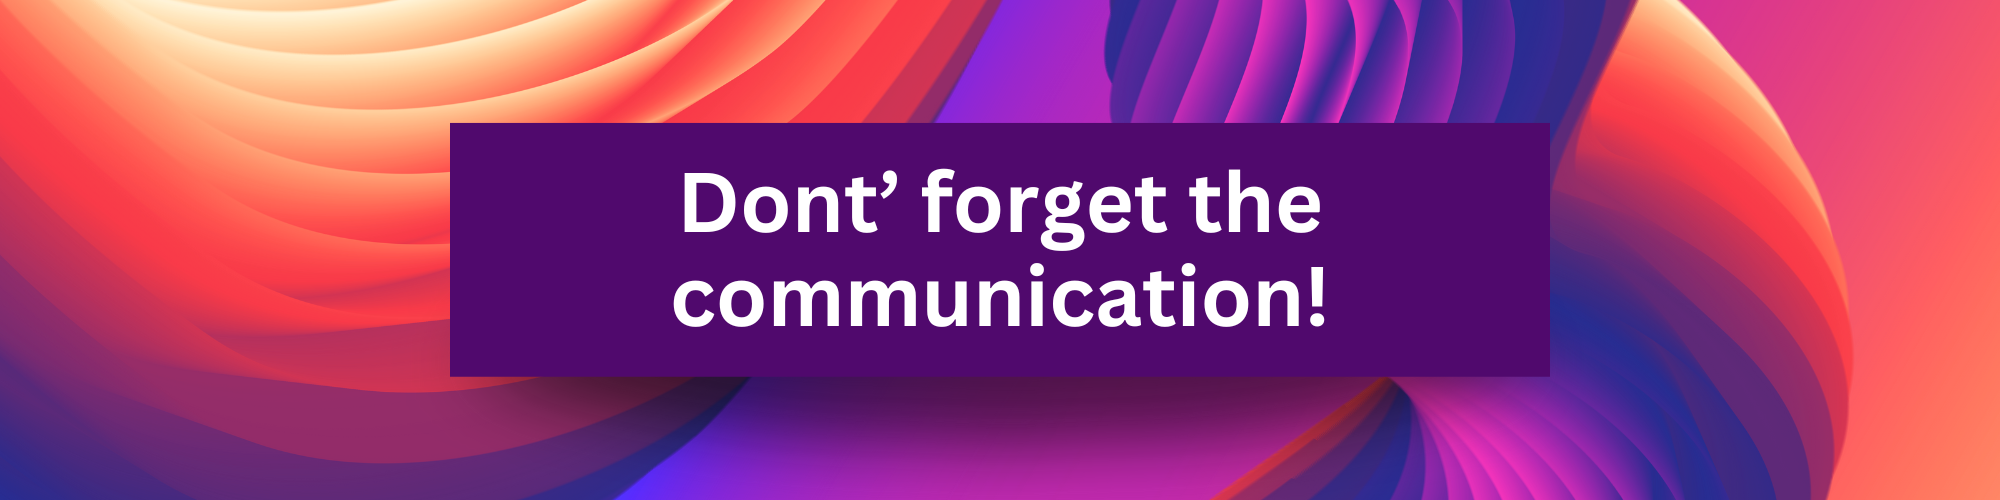 Don't forget the communication!